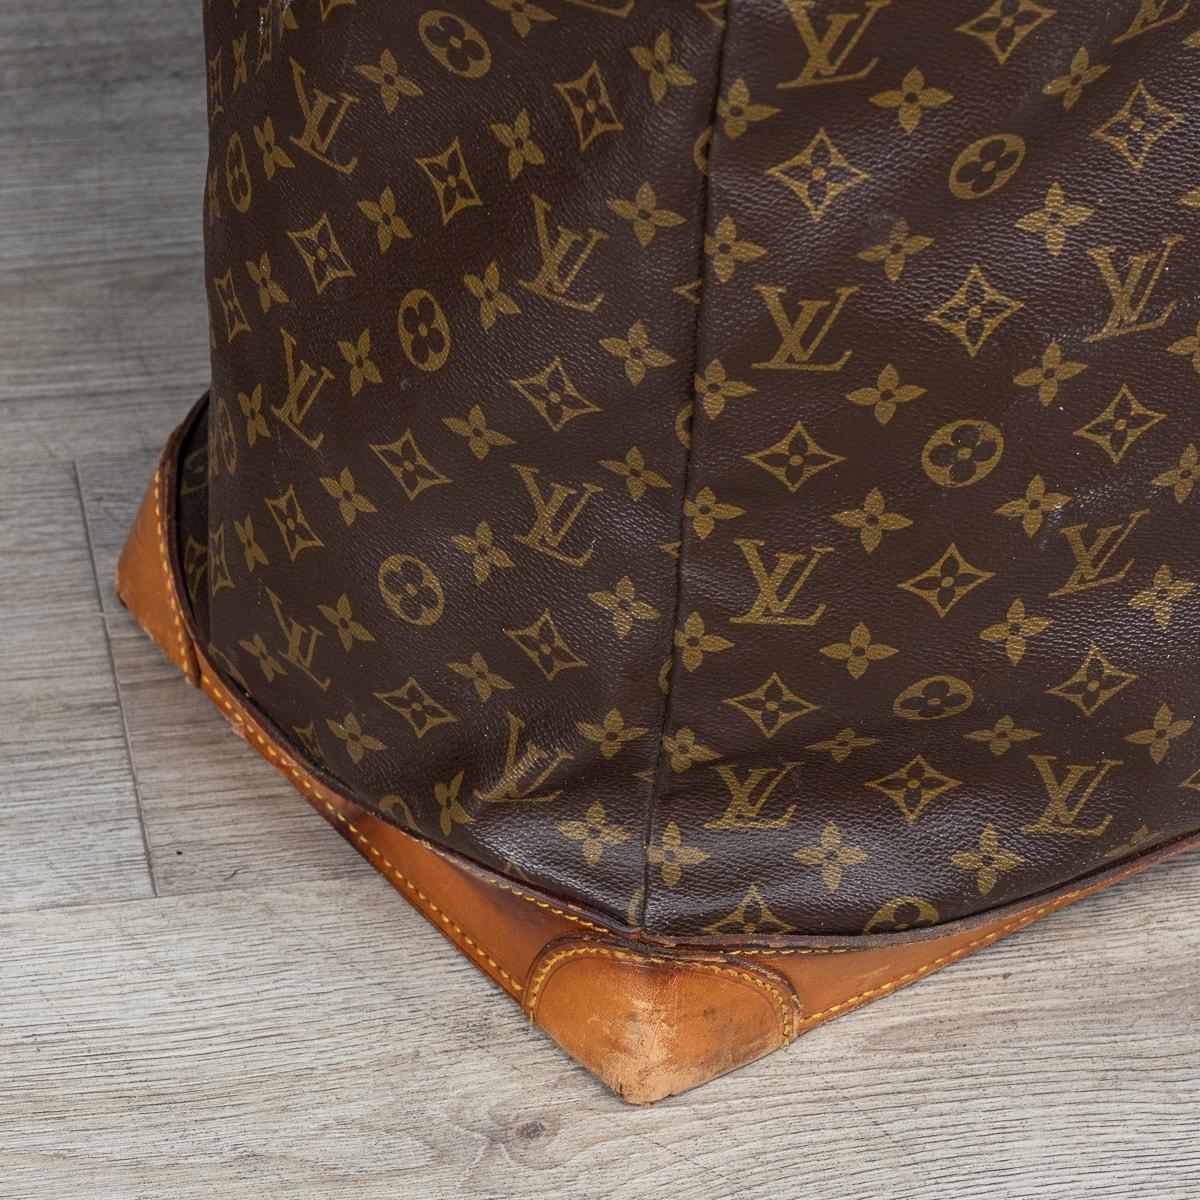 20th Century Louis Vuitton Steamer Bag In Monogram Canvas, Made In France For Sale 11